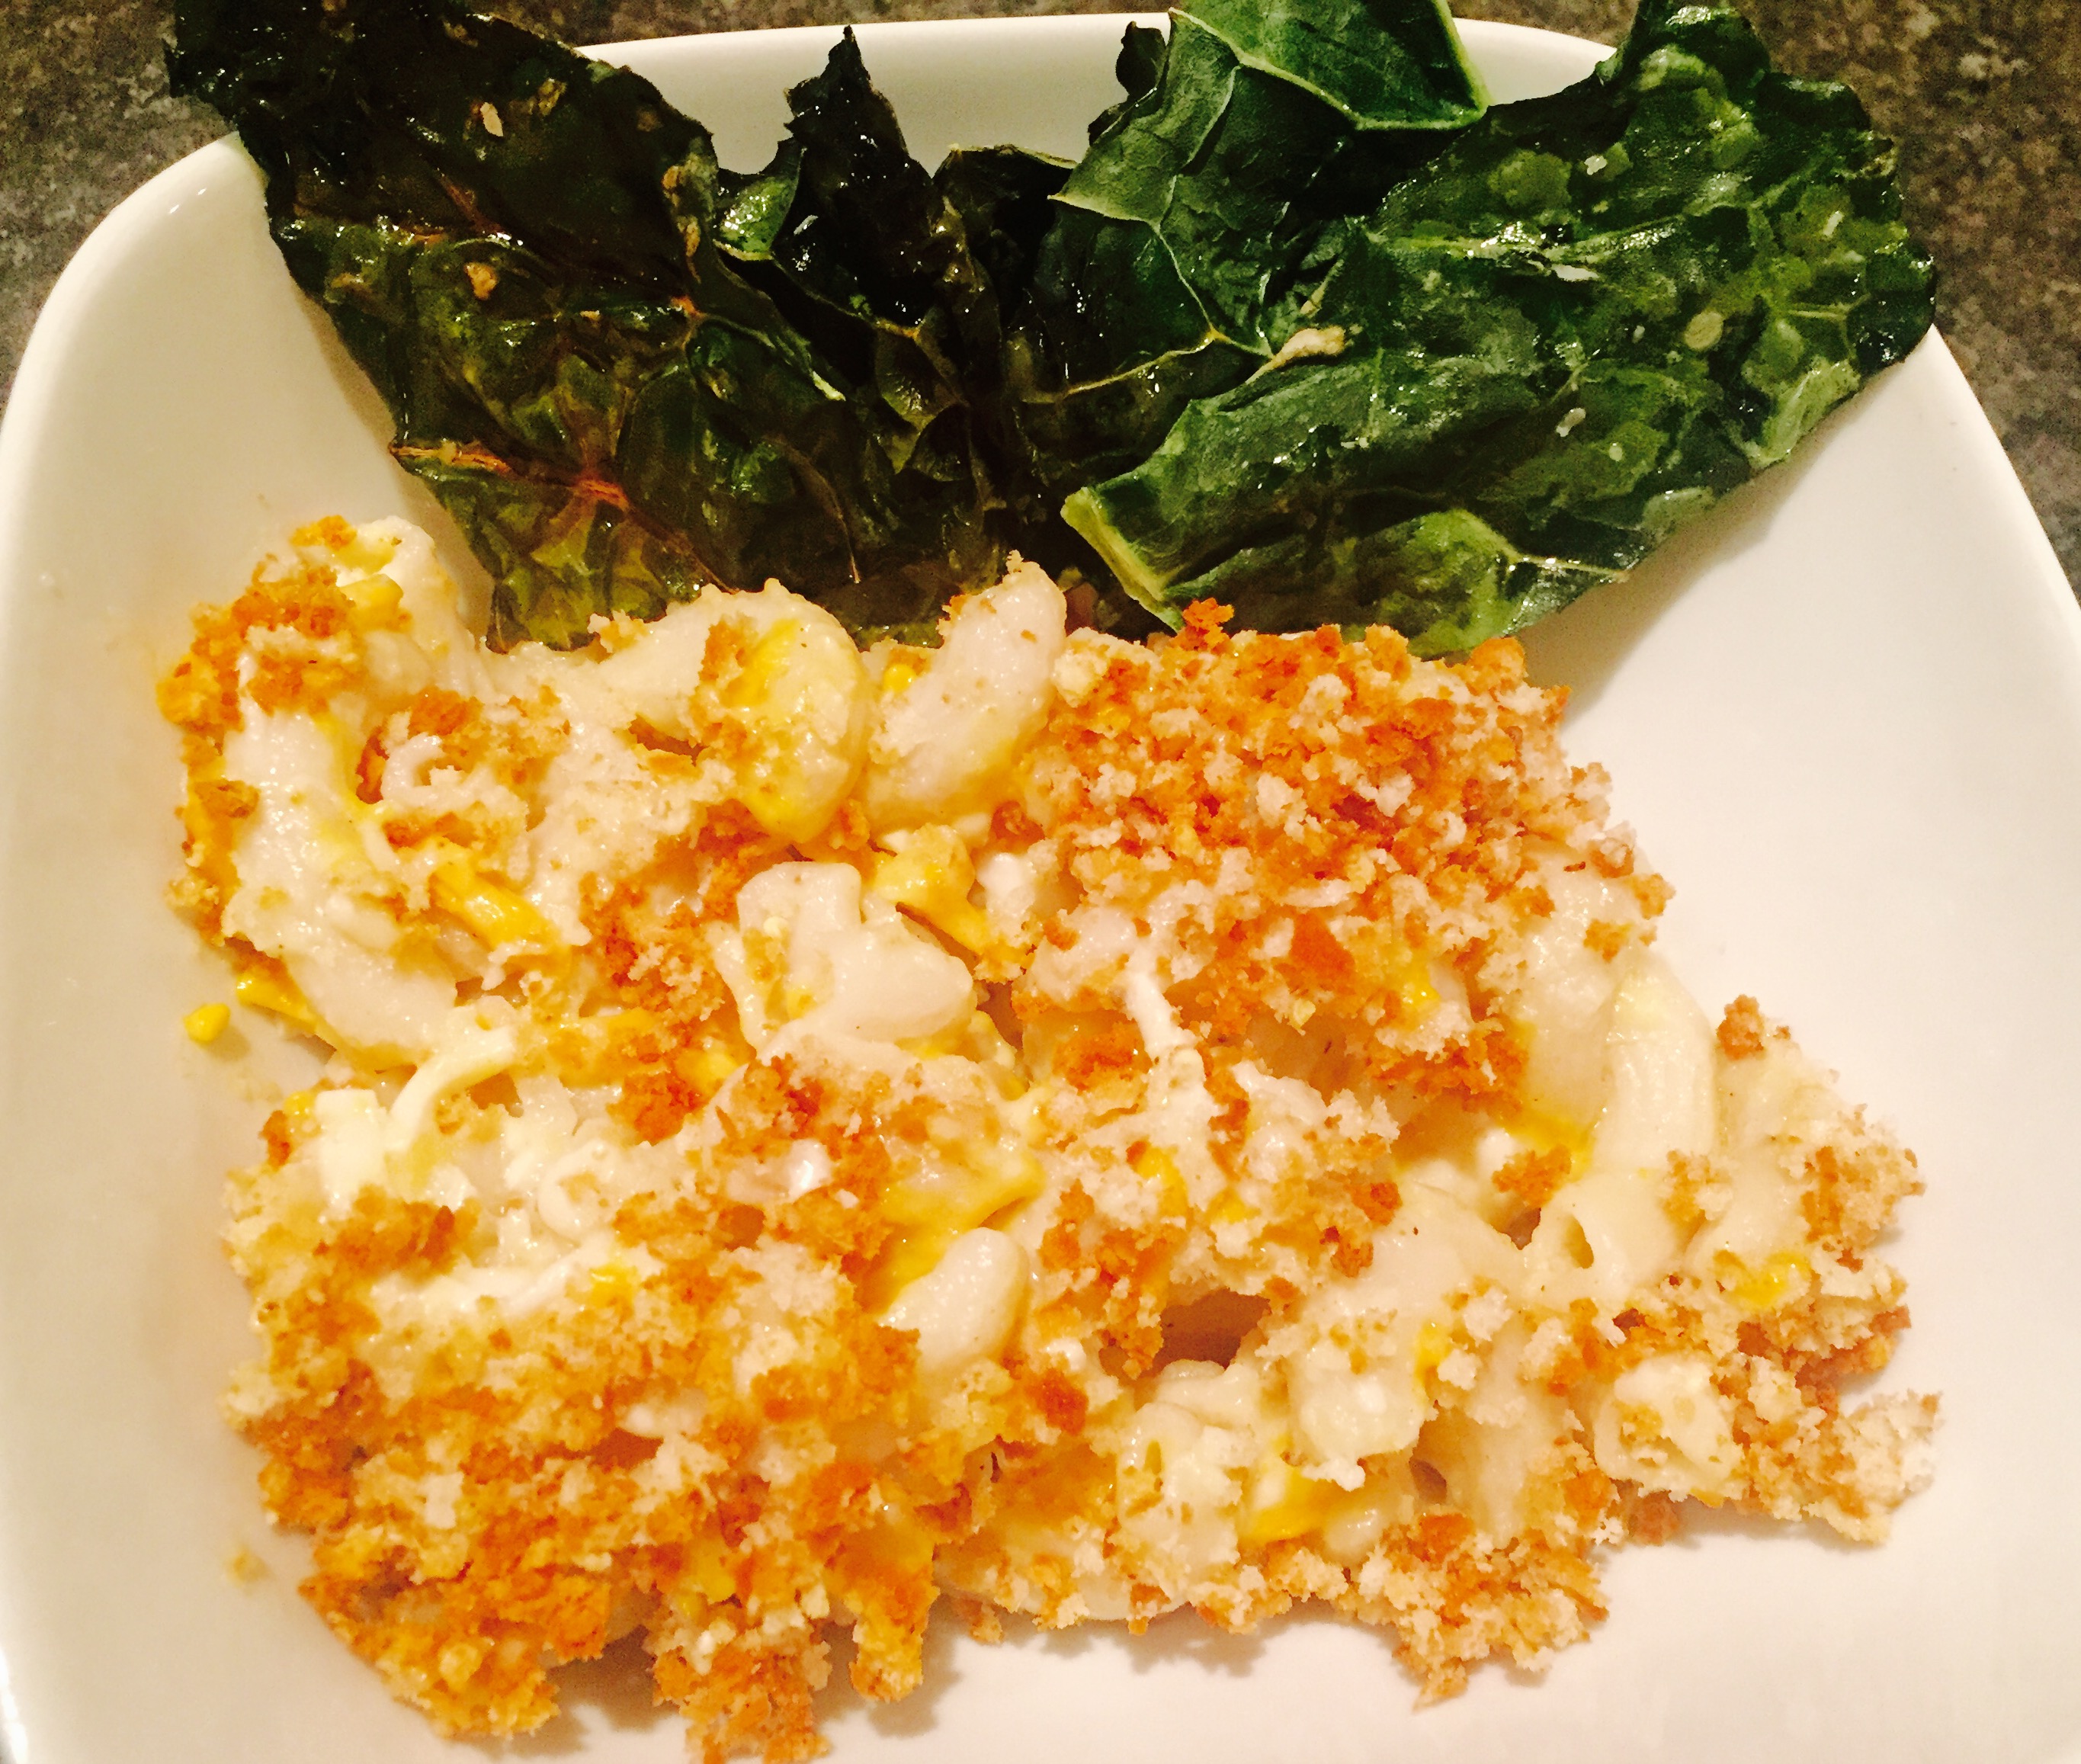 Dairy Free Mac and Cheese with Roasted Kale Chips